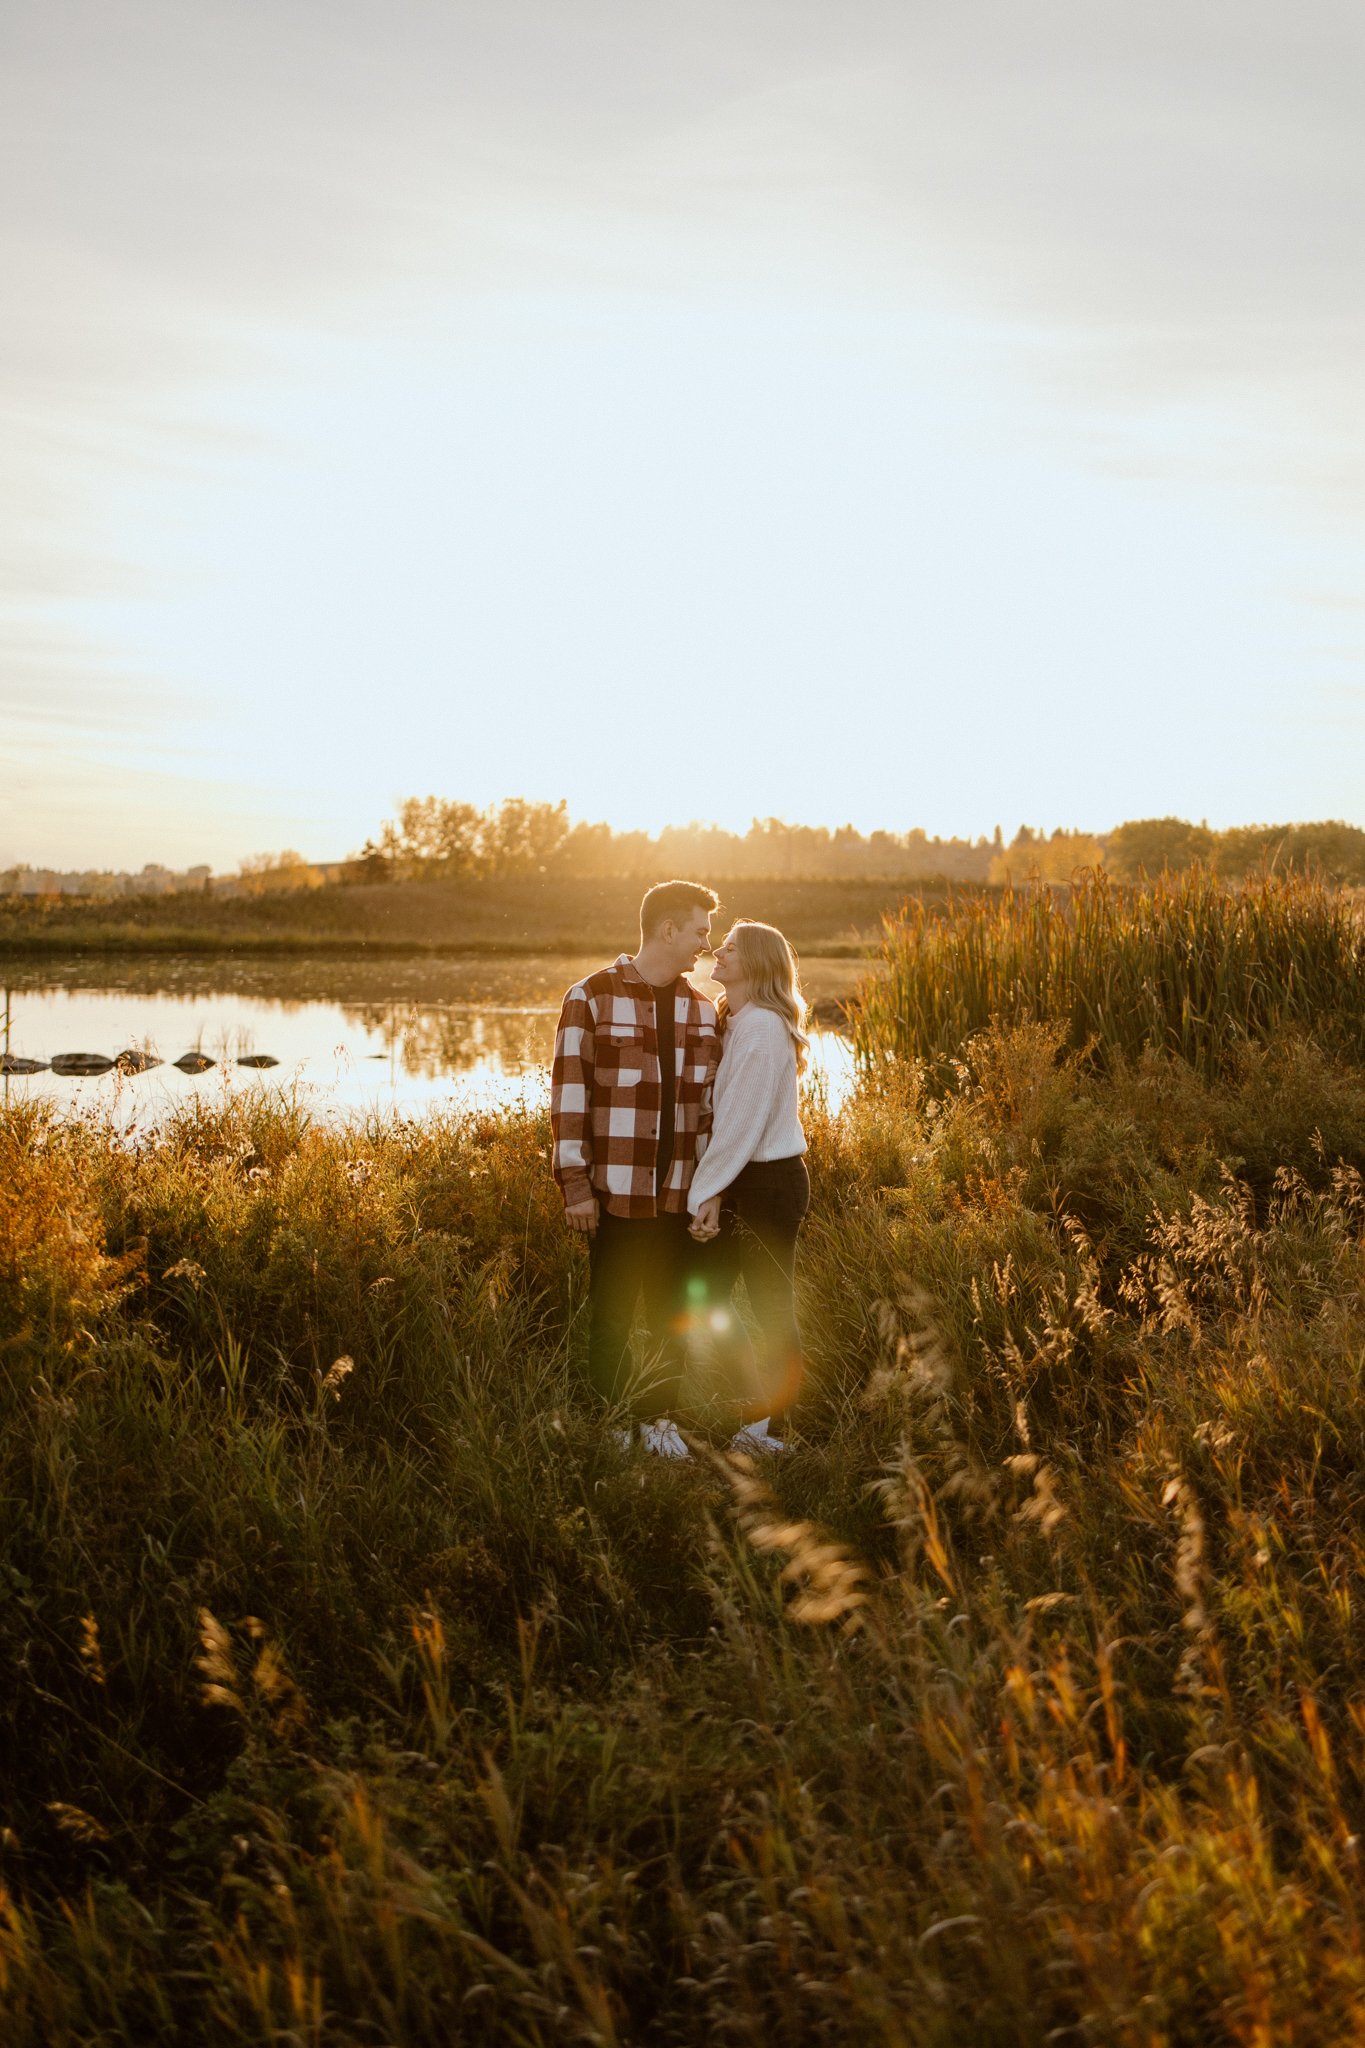 Calgary-wedding-photographer-love-and-be-loved-photography-Matthew-Kyra-Fish-Creek-Park-Fall-Engagement-Session-32.jpg